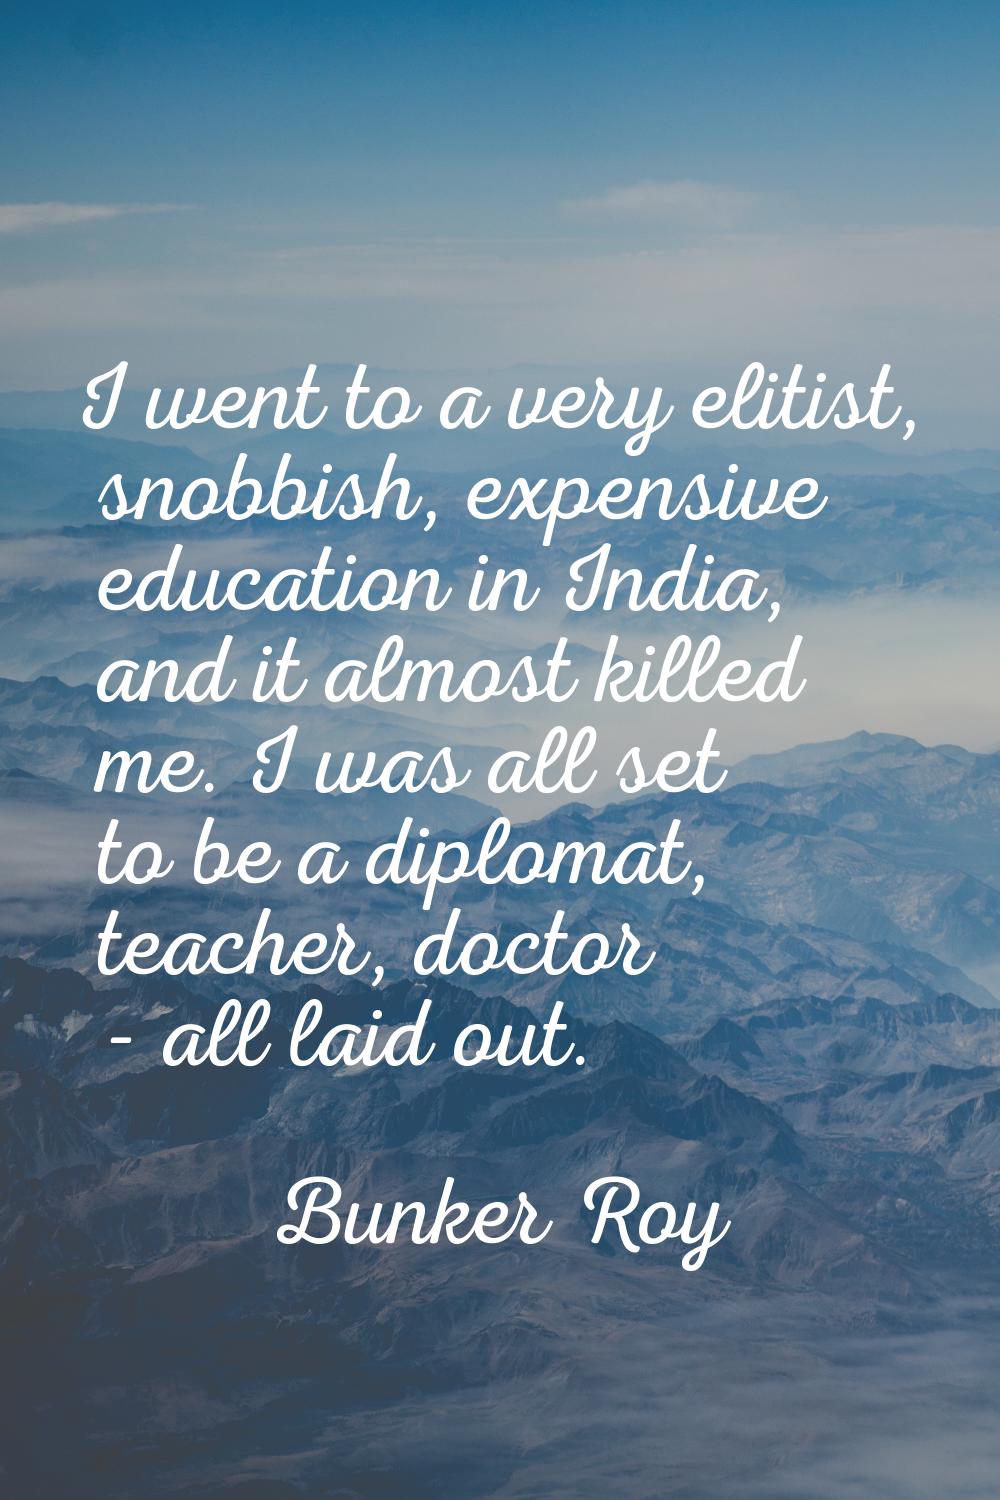 I went to a very elitist, snobbish, expensive education in India, and it almost killed me. I was al